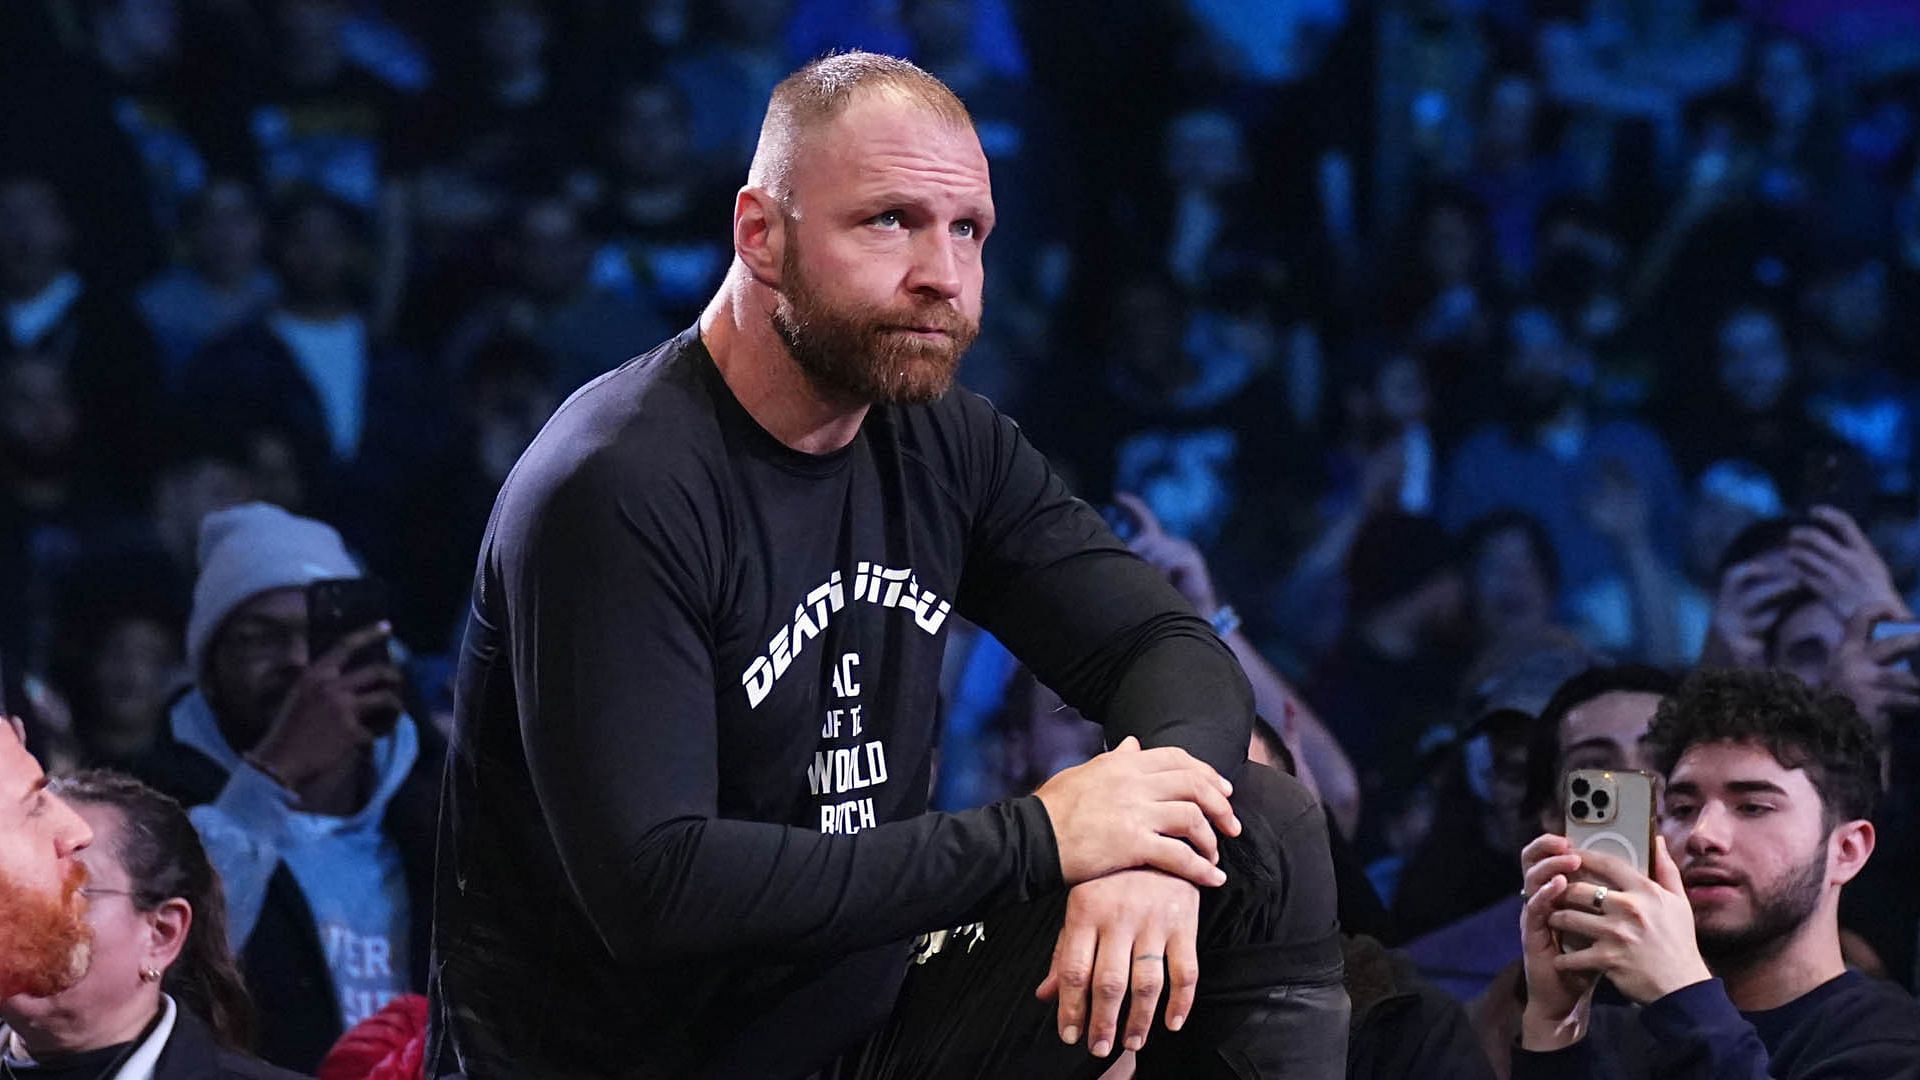 Jon Moxley is one of AEW